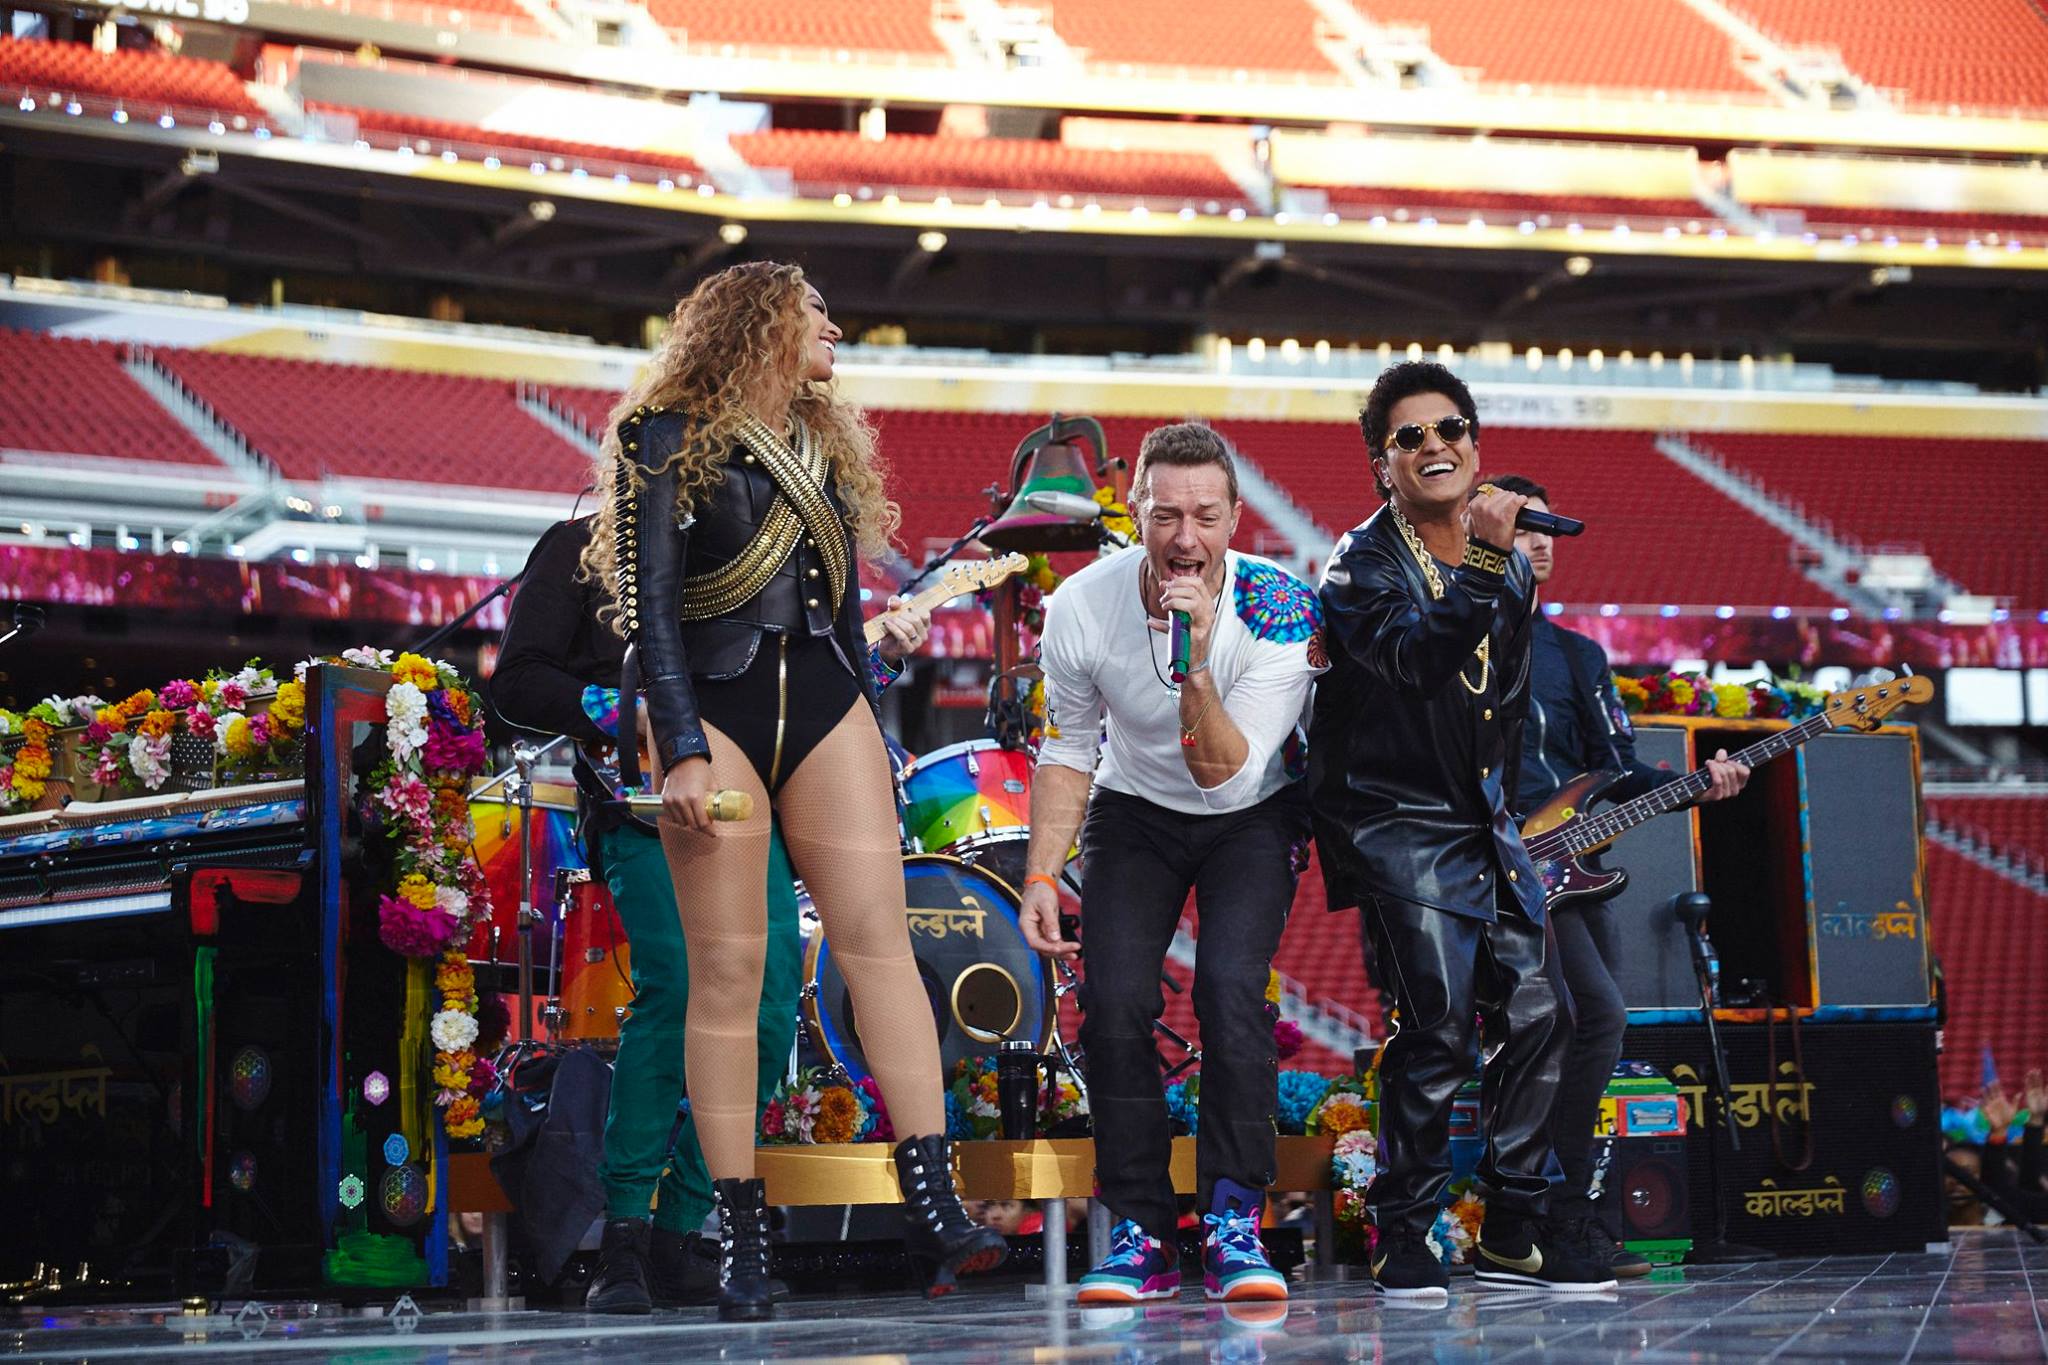 The Super Bowl 50 Halftime Show with Coldplay, Beyonce & Bruno Mars